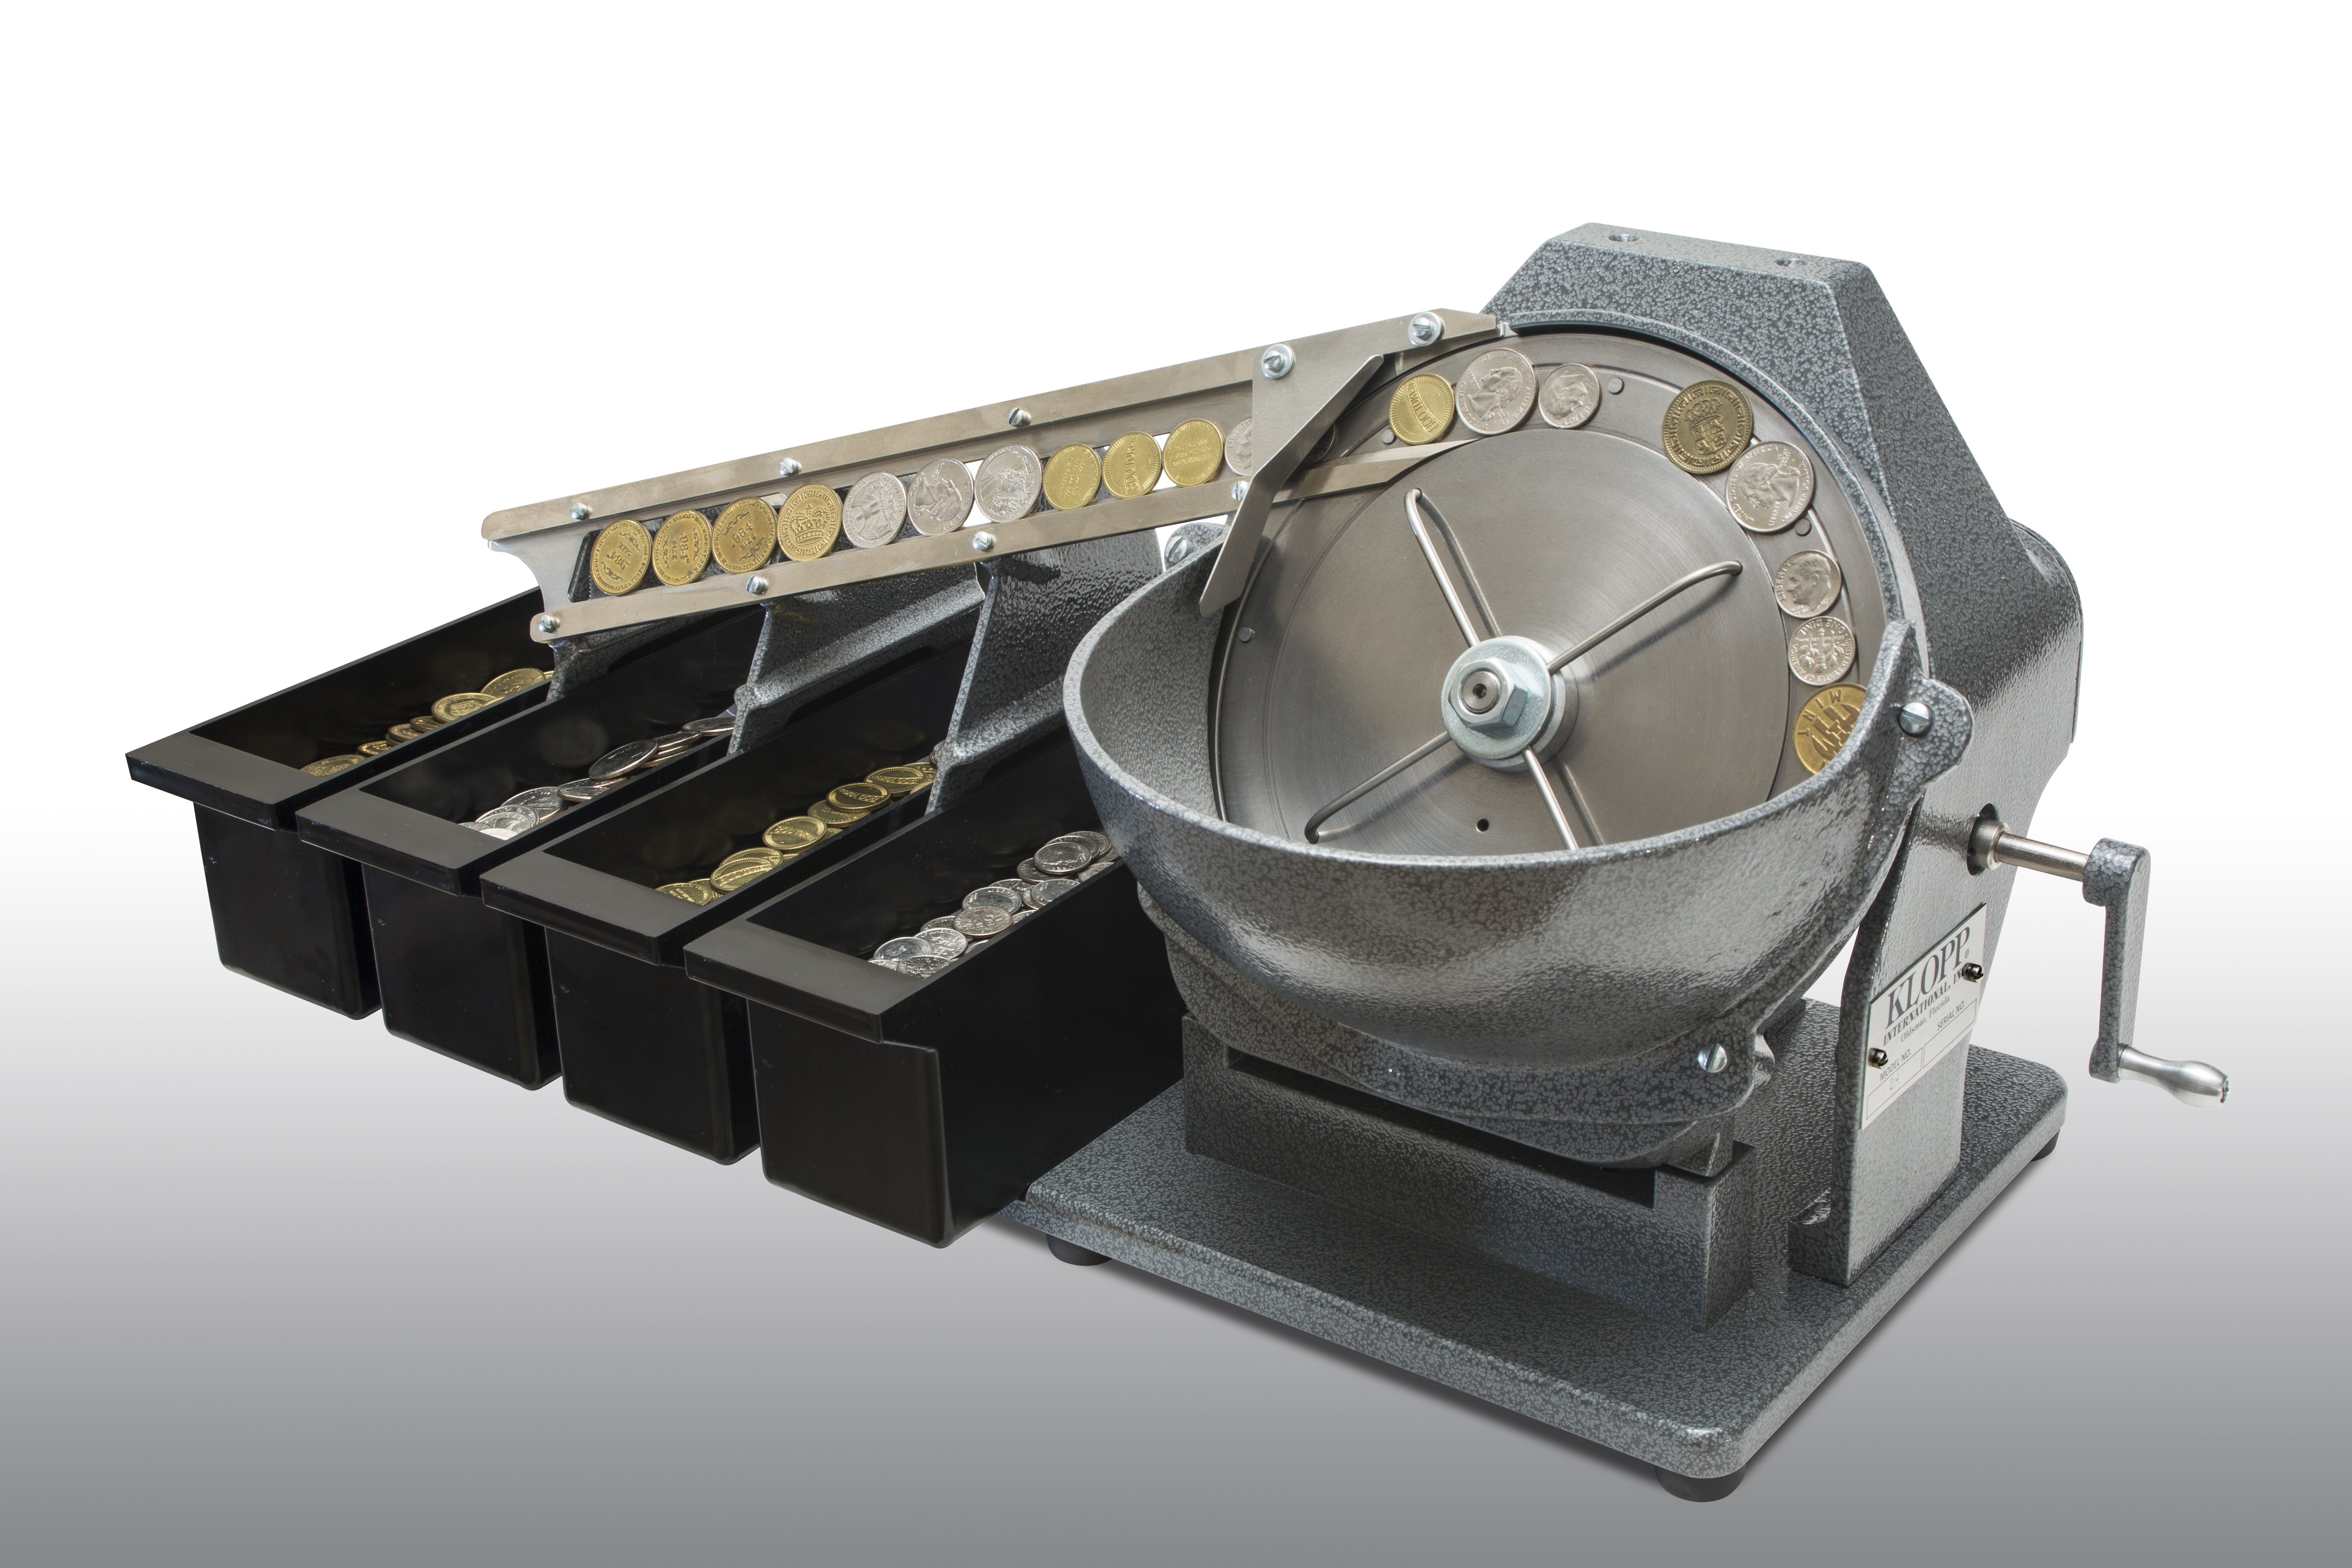 KLOPP Coin Sorter Model SM is recommended for sorting wet coins & tokens from carwashes